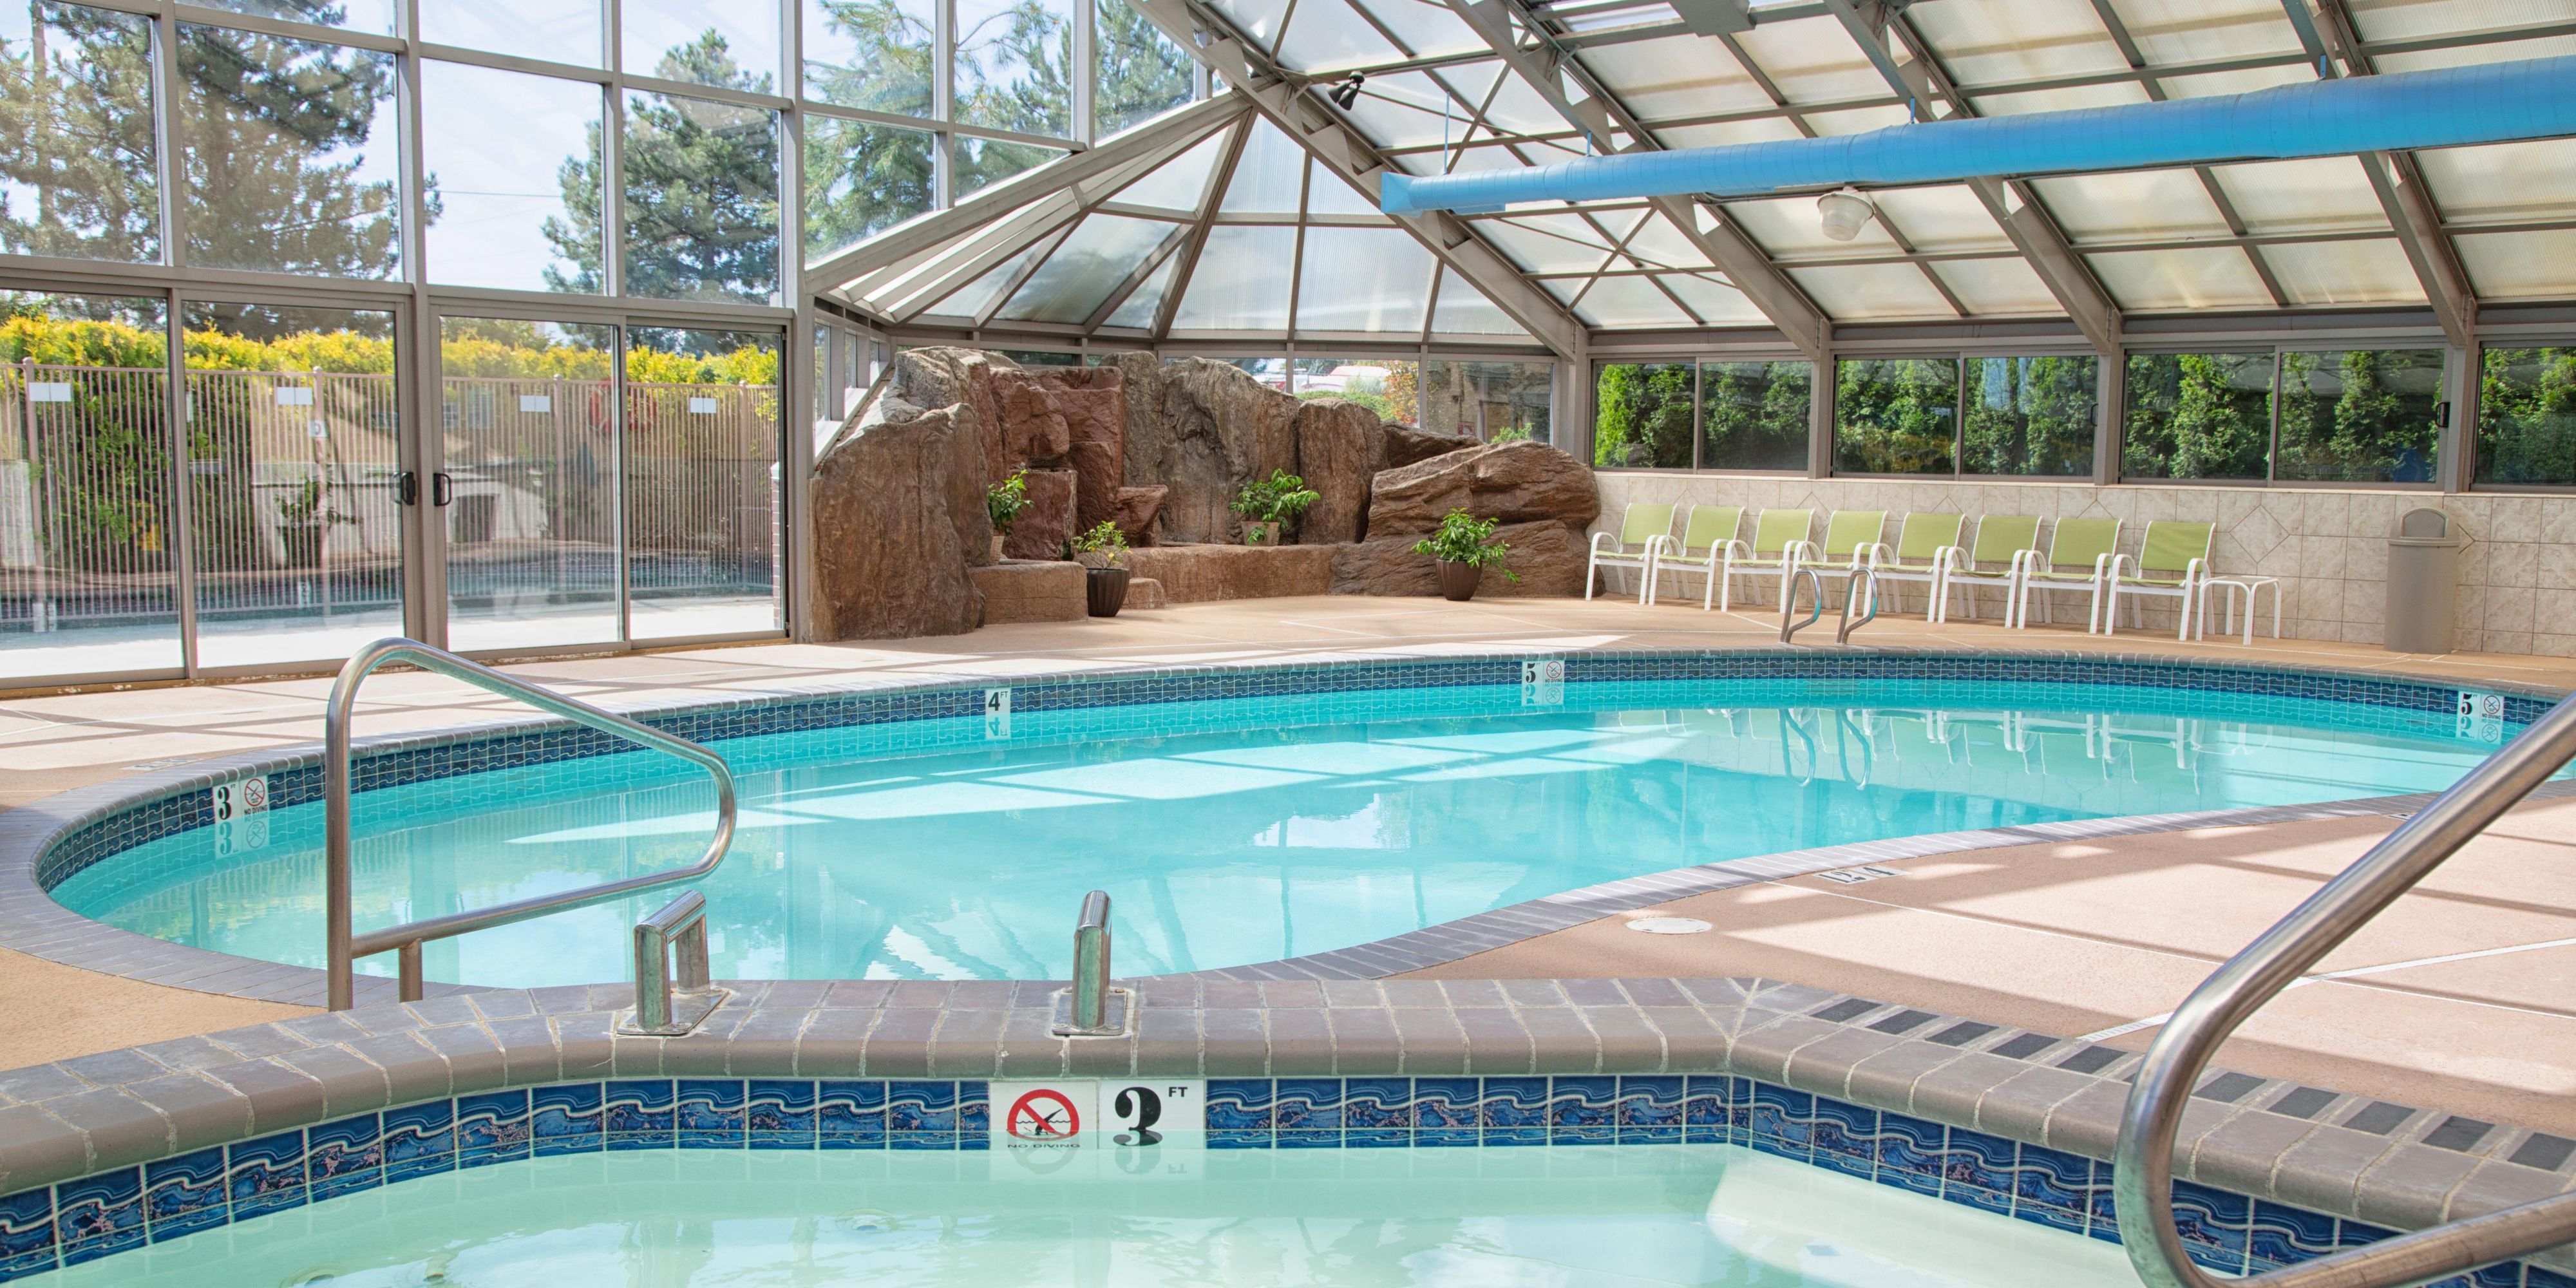 That's right, our pool is open 24-hours a day! Make a splash and enjoy our tropical themed indoor heated pool, or relax an unwind in our hot tub.